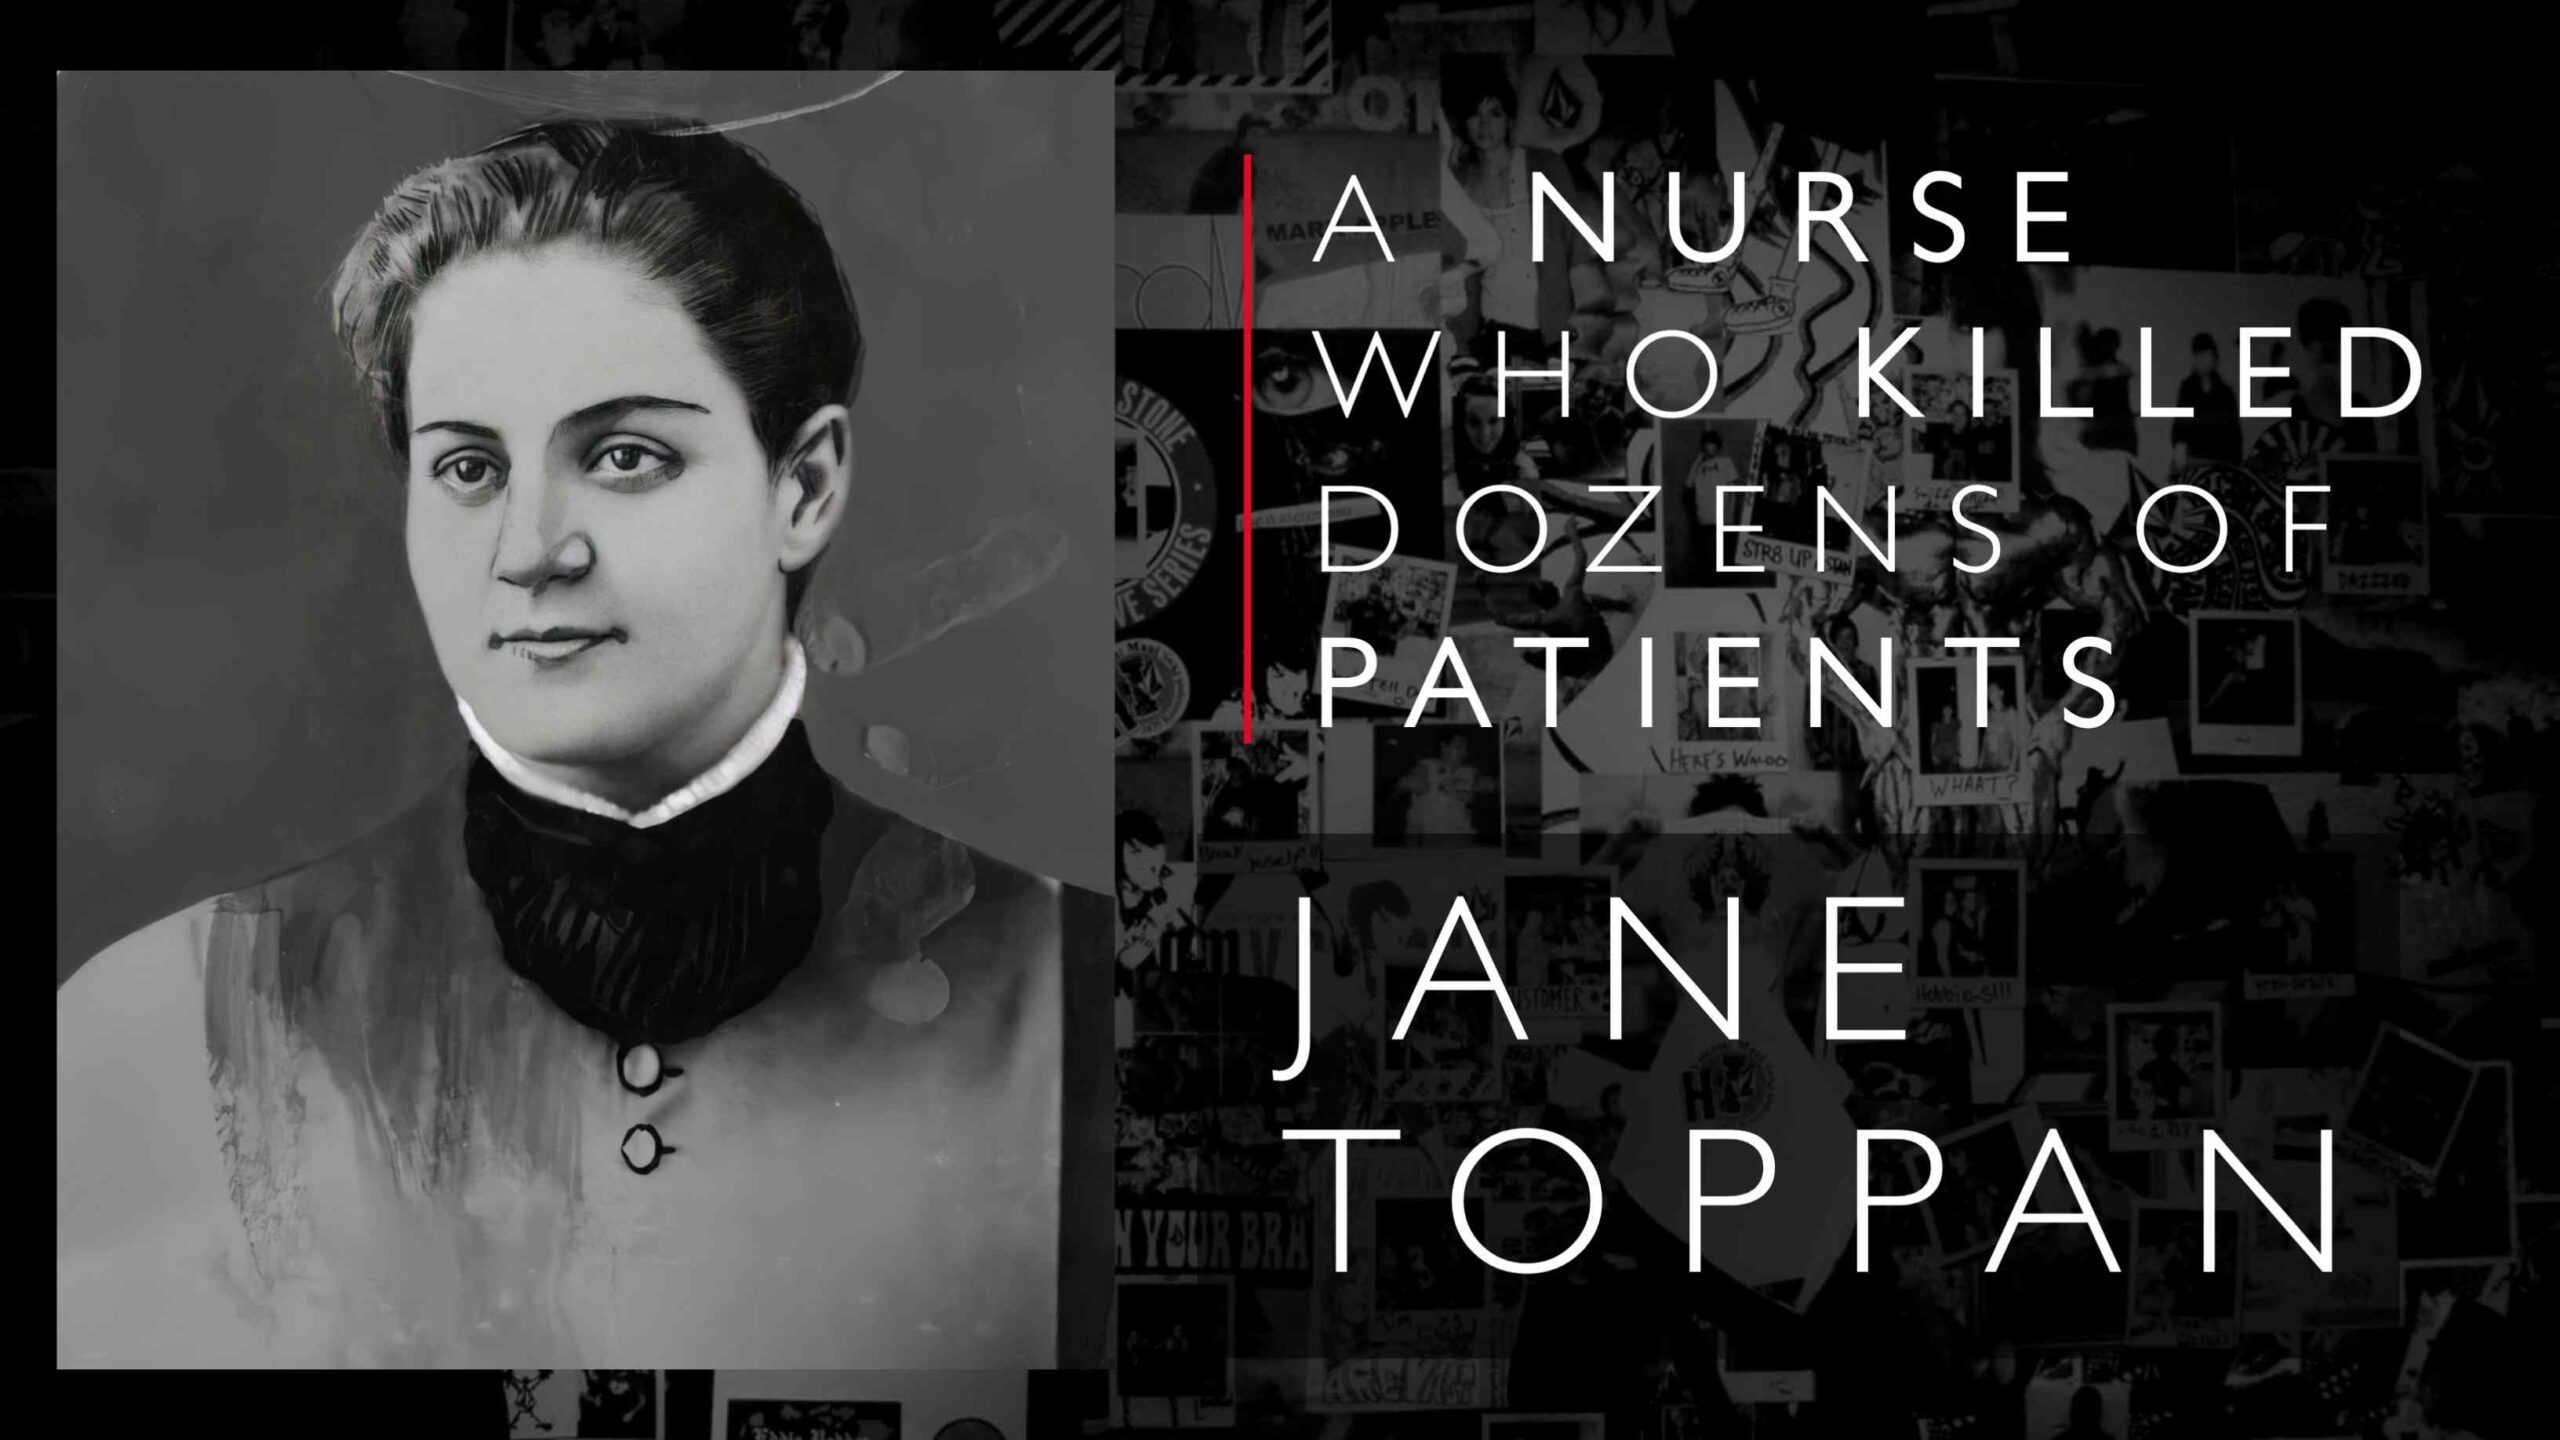 Jane Toppan (seen at age 24) was a nurse who went on a killing spree that started in 1885, with patients and friends, and had claimed up to 30 victims by its end in 1901.